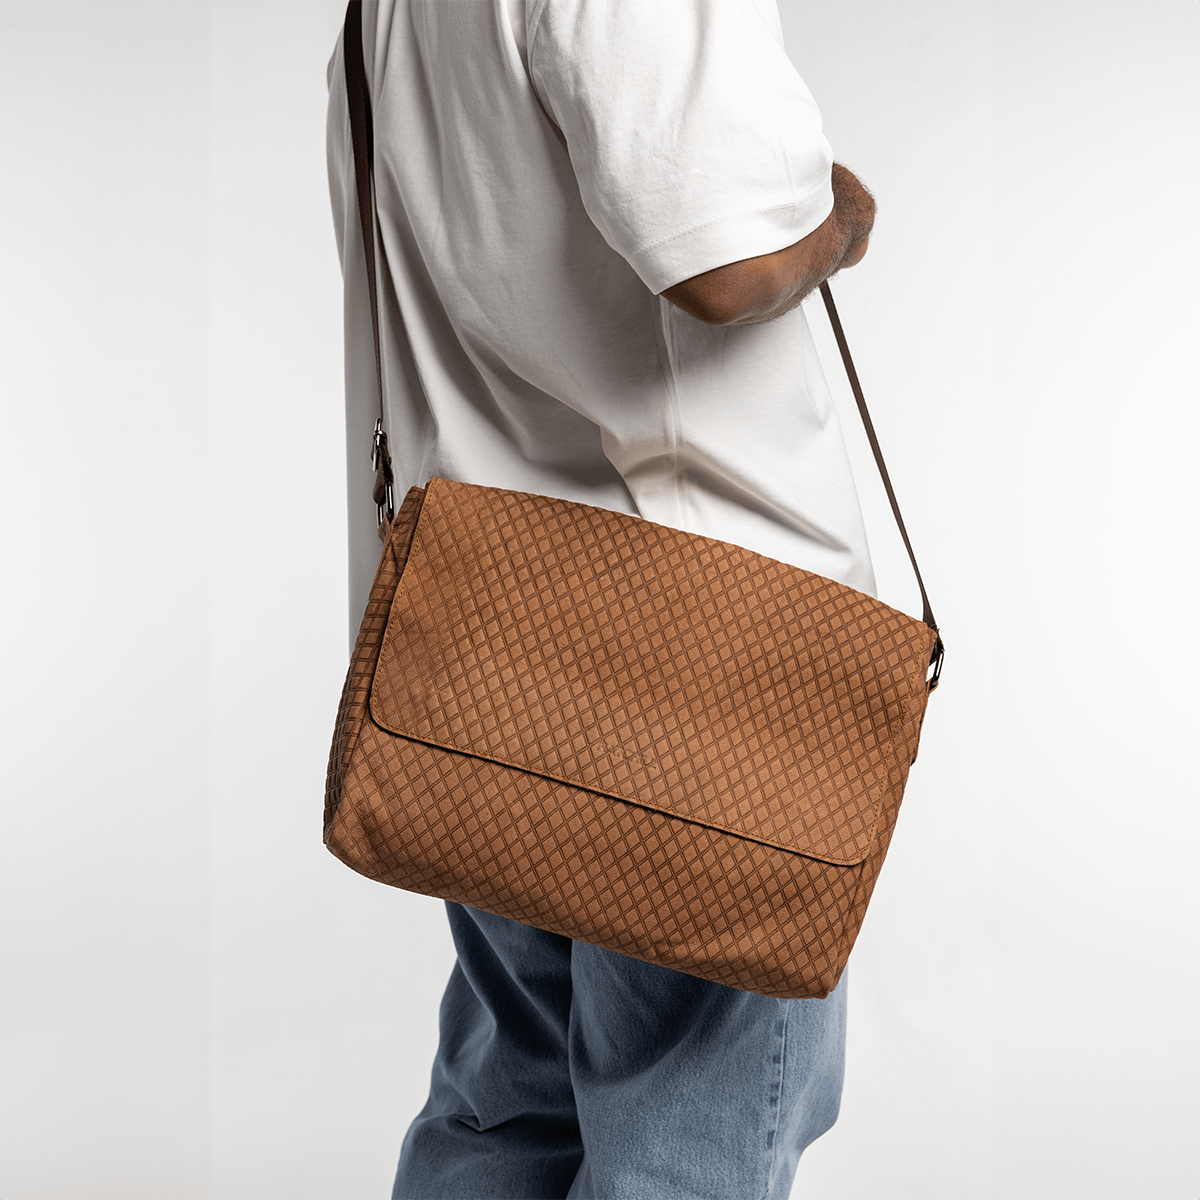 Leather Everyday bag - Camel - Hatchill